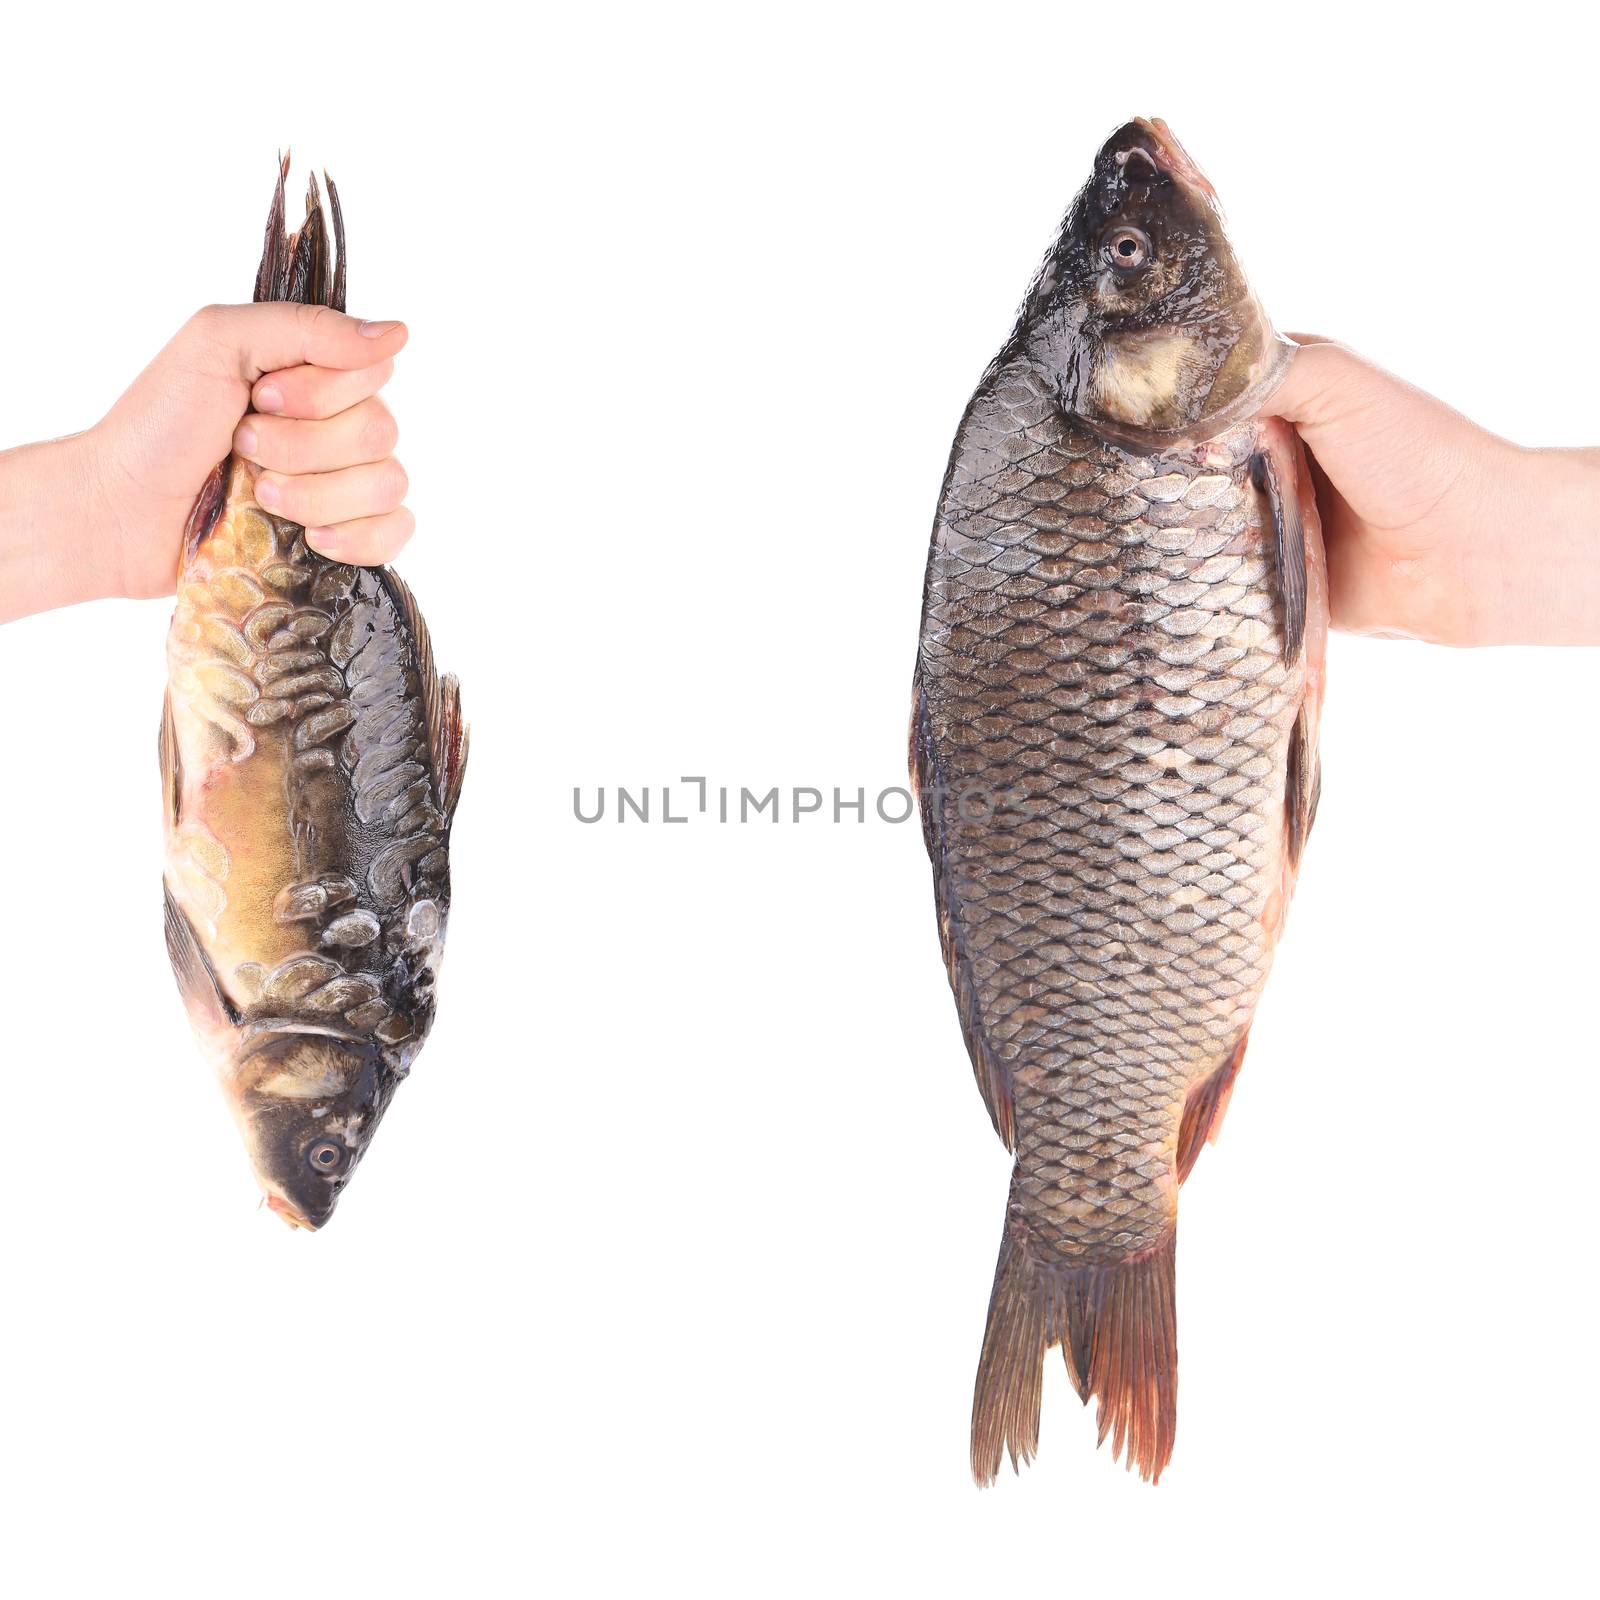 Hands with fish. Isolated on a white background.